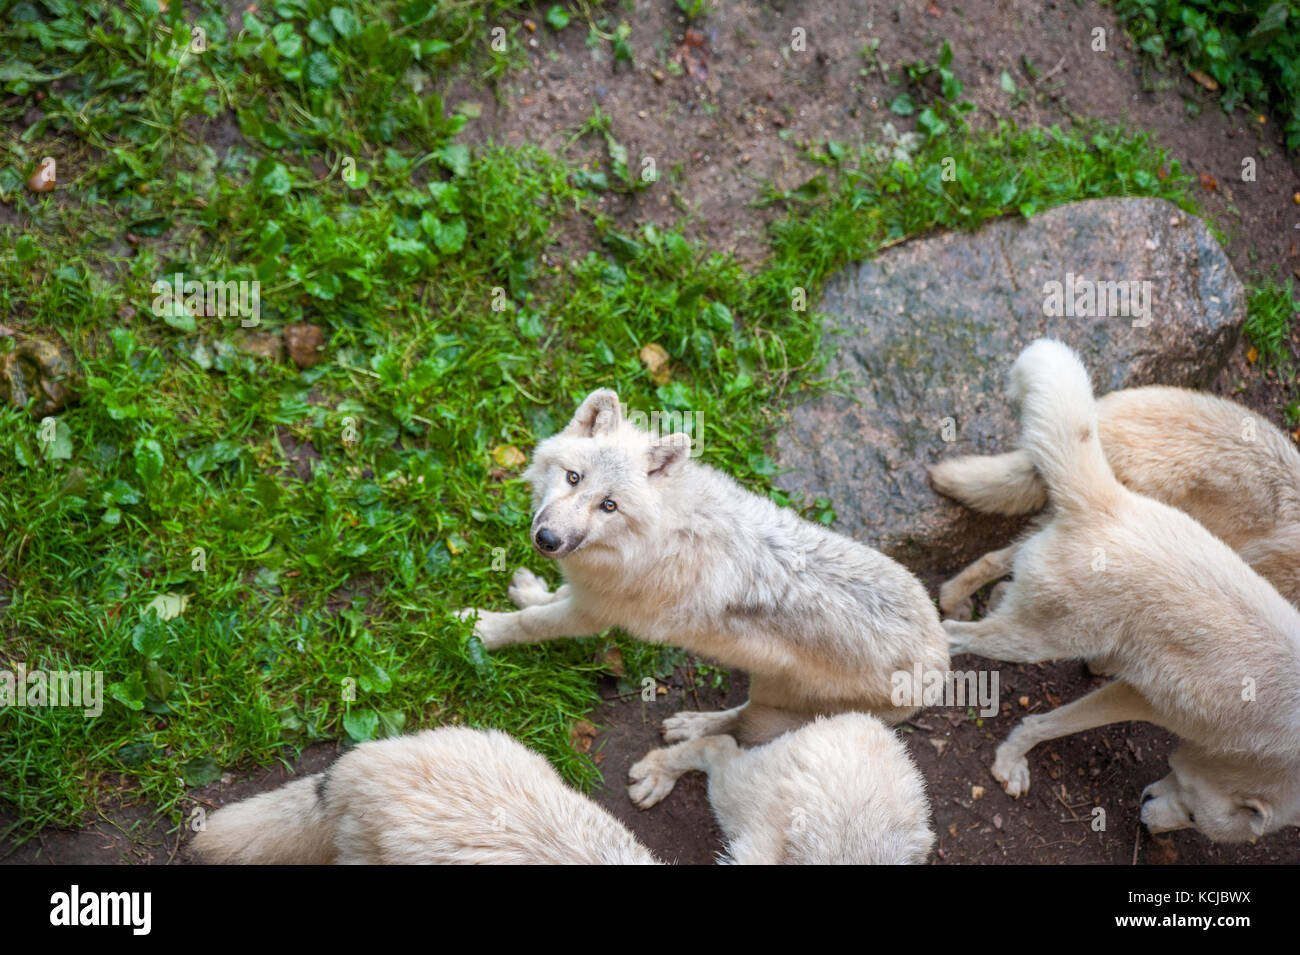 Wild, white wolfes eating their food during the feeding time in a zoo Stock Photo